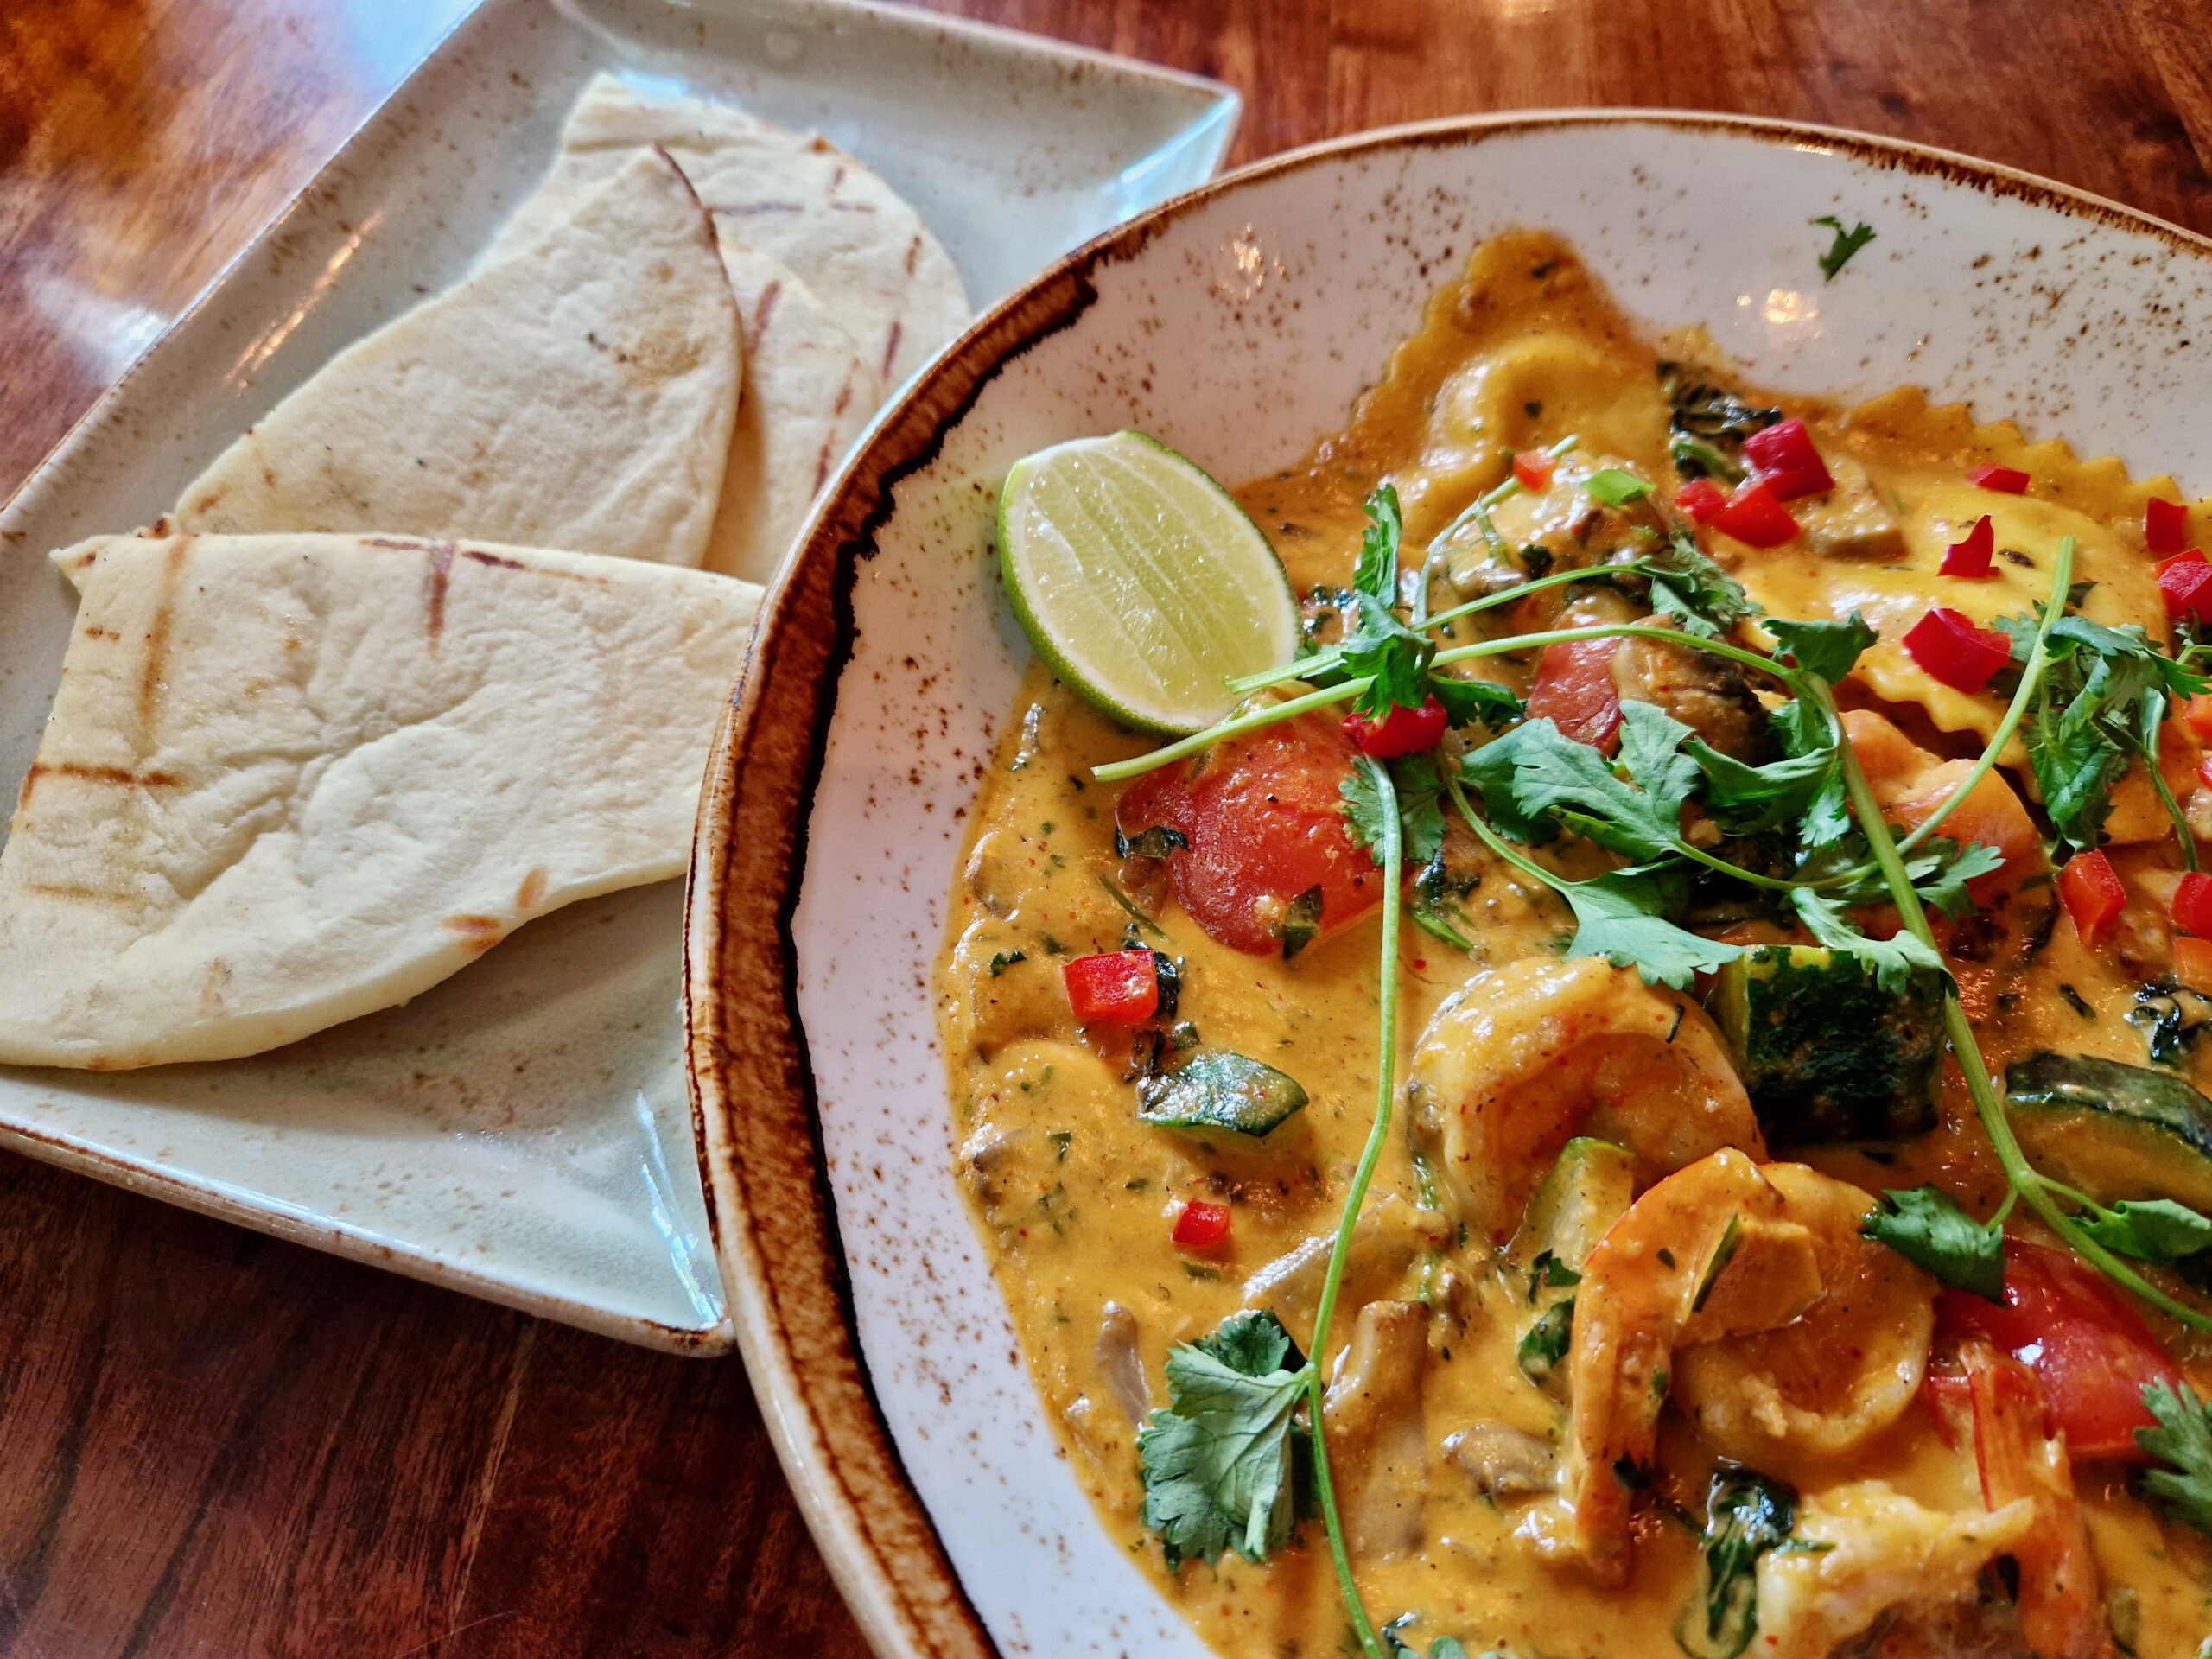 Malaysian Seafood Curry with a side of naan bread at Yak and Yeti Animal Kingdom